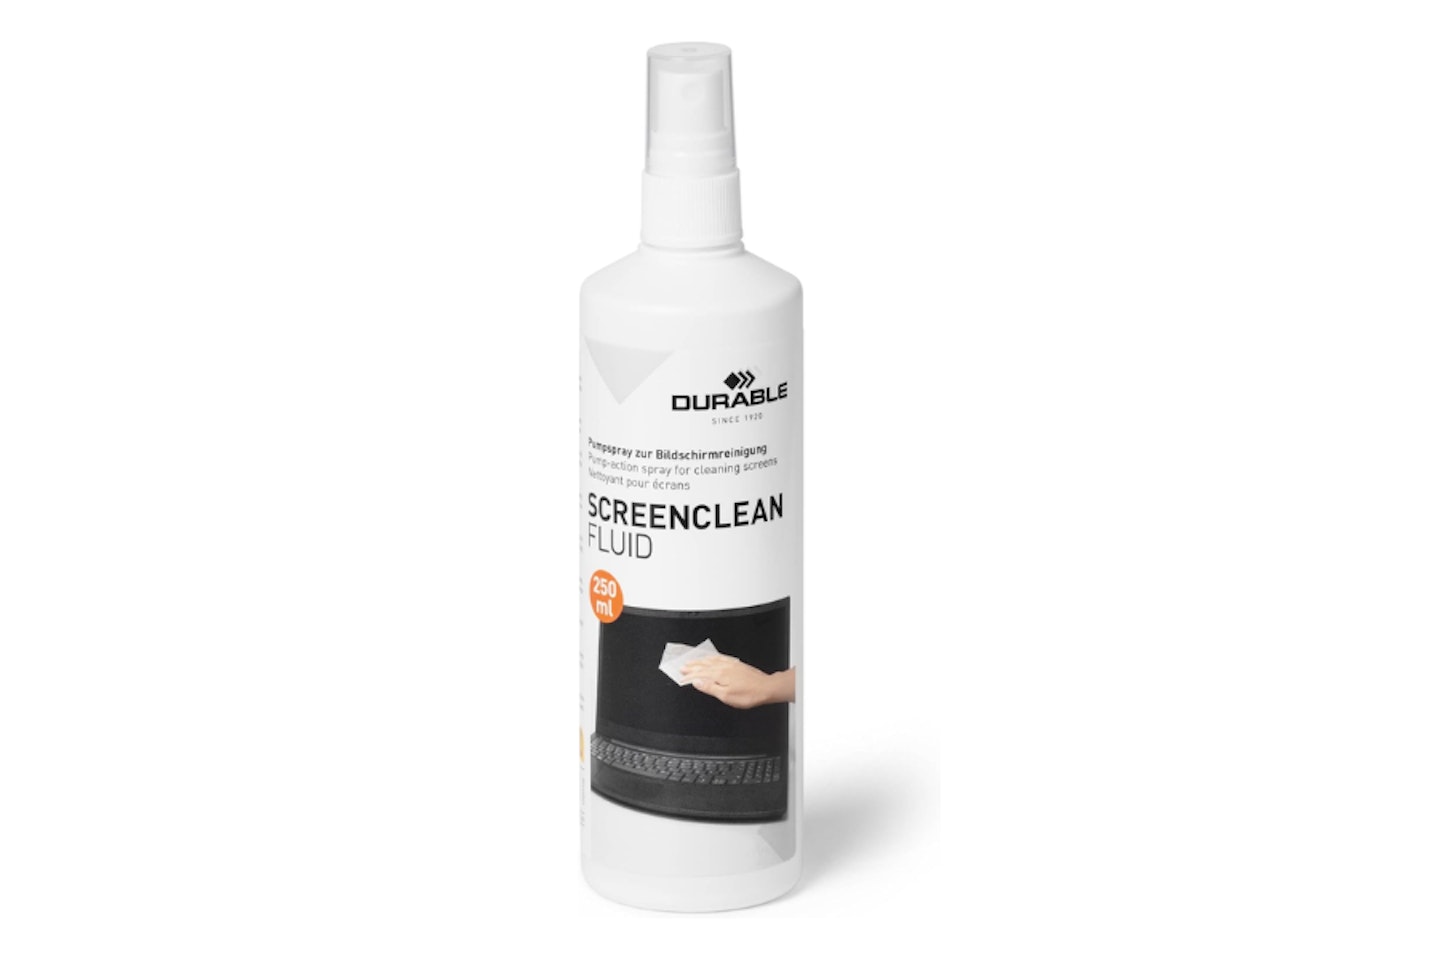 Durable SCREENCLEAN Streak-Free Anti-Static Screen Cleaner Spray - one of the best TV screen cleaner products